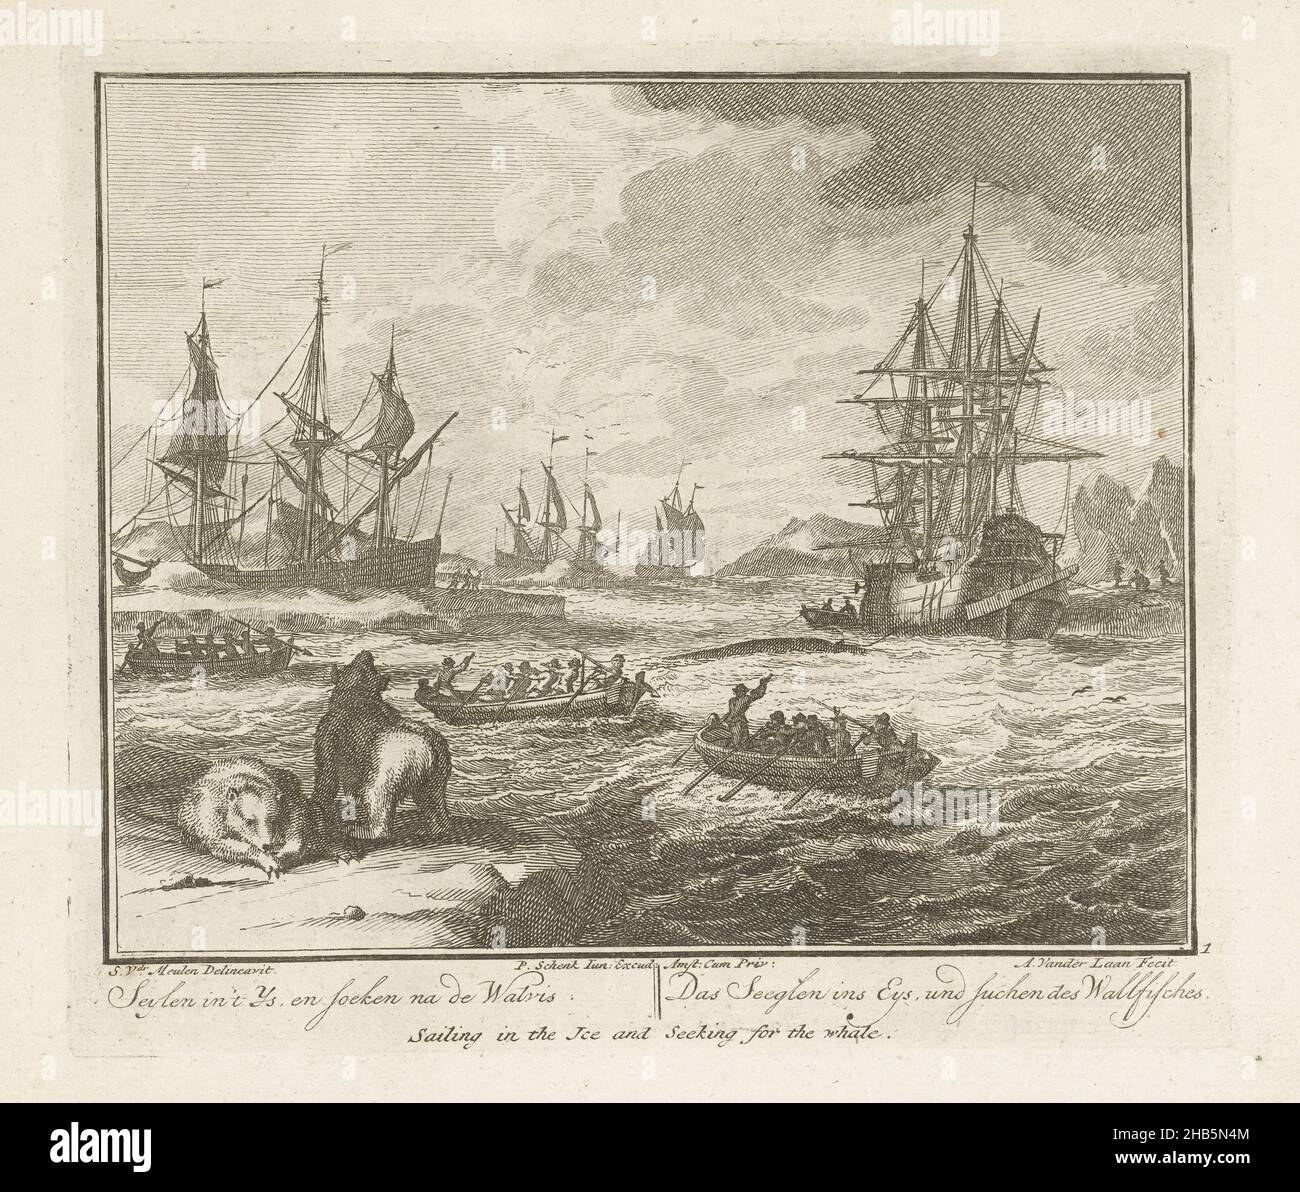 Whaling in the Ice Sea, ca. 1725, Seylen in 't Ys, en soeken na de Walvis, Das Seeglen ins Eys, und suchen des Wallfisches, Sailing in the Ice and Seeking for the whale (title on object), Whaling (series title), Whaling in the Ice Sea, ca. 1725. In the foreground several polar bears. Part of the series on whaling.  Printed on the same sheet as no. 2., print maker: Adolf van der Laan (mentioned on object), intermediary draughtsman: Sieuwert van der Meulen (mentioned on object), print maker: Northern Netherlands, publisher: Amsterdam, 1720 - 1730, paper, etching, height 180 mm × width 206 mm Stock Photo